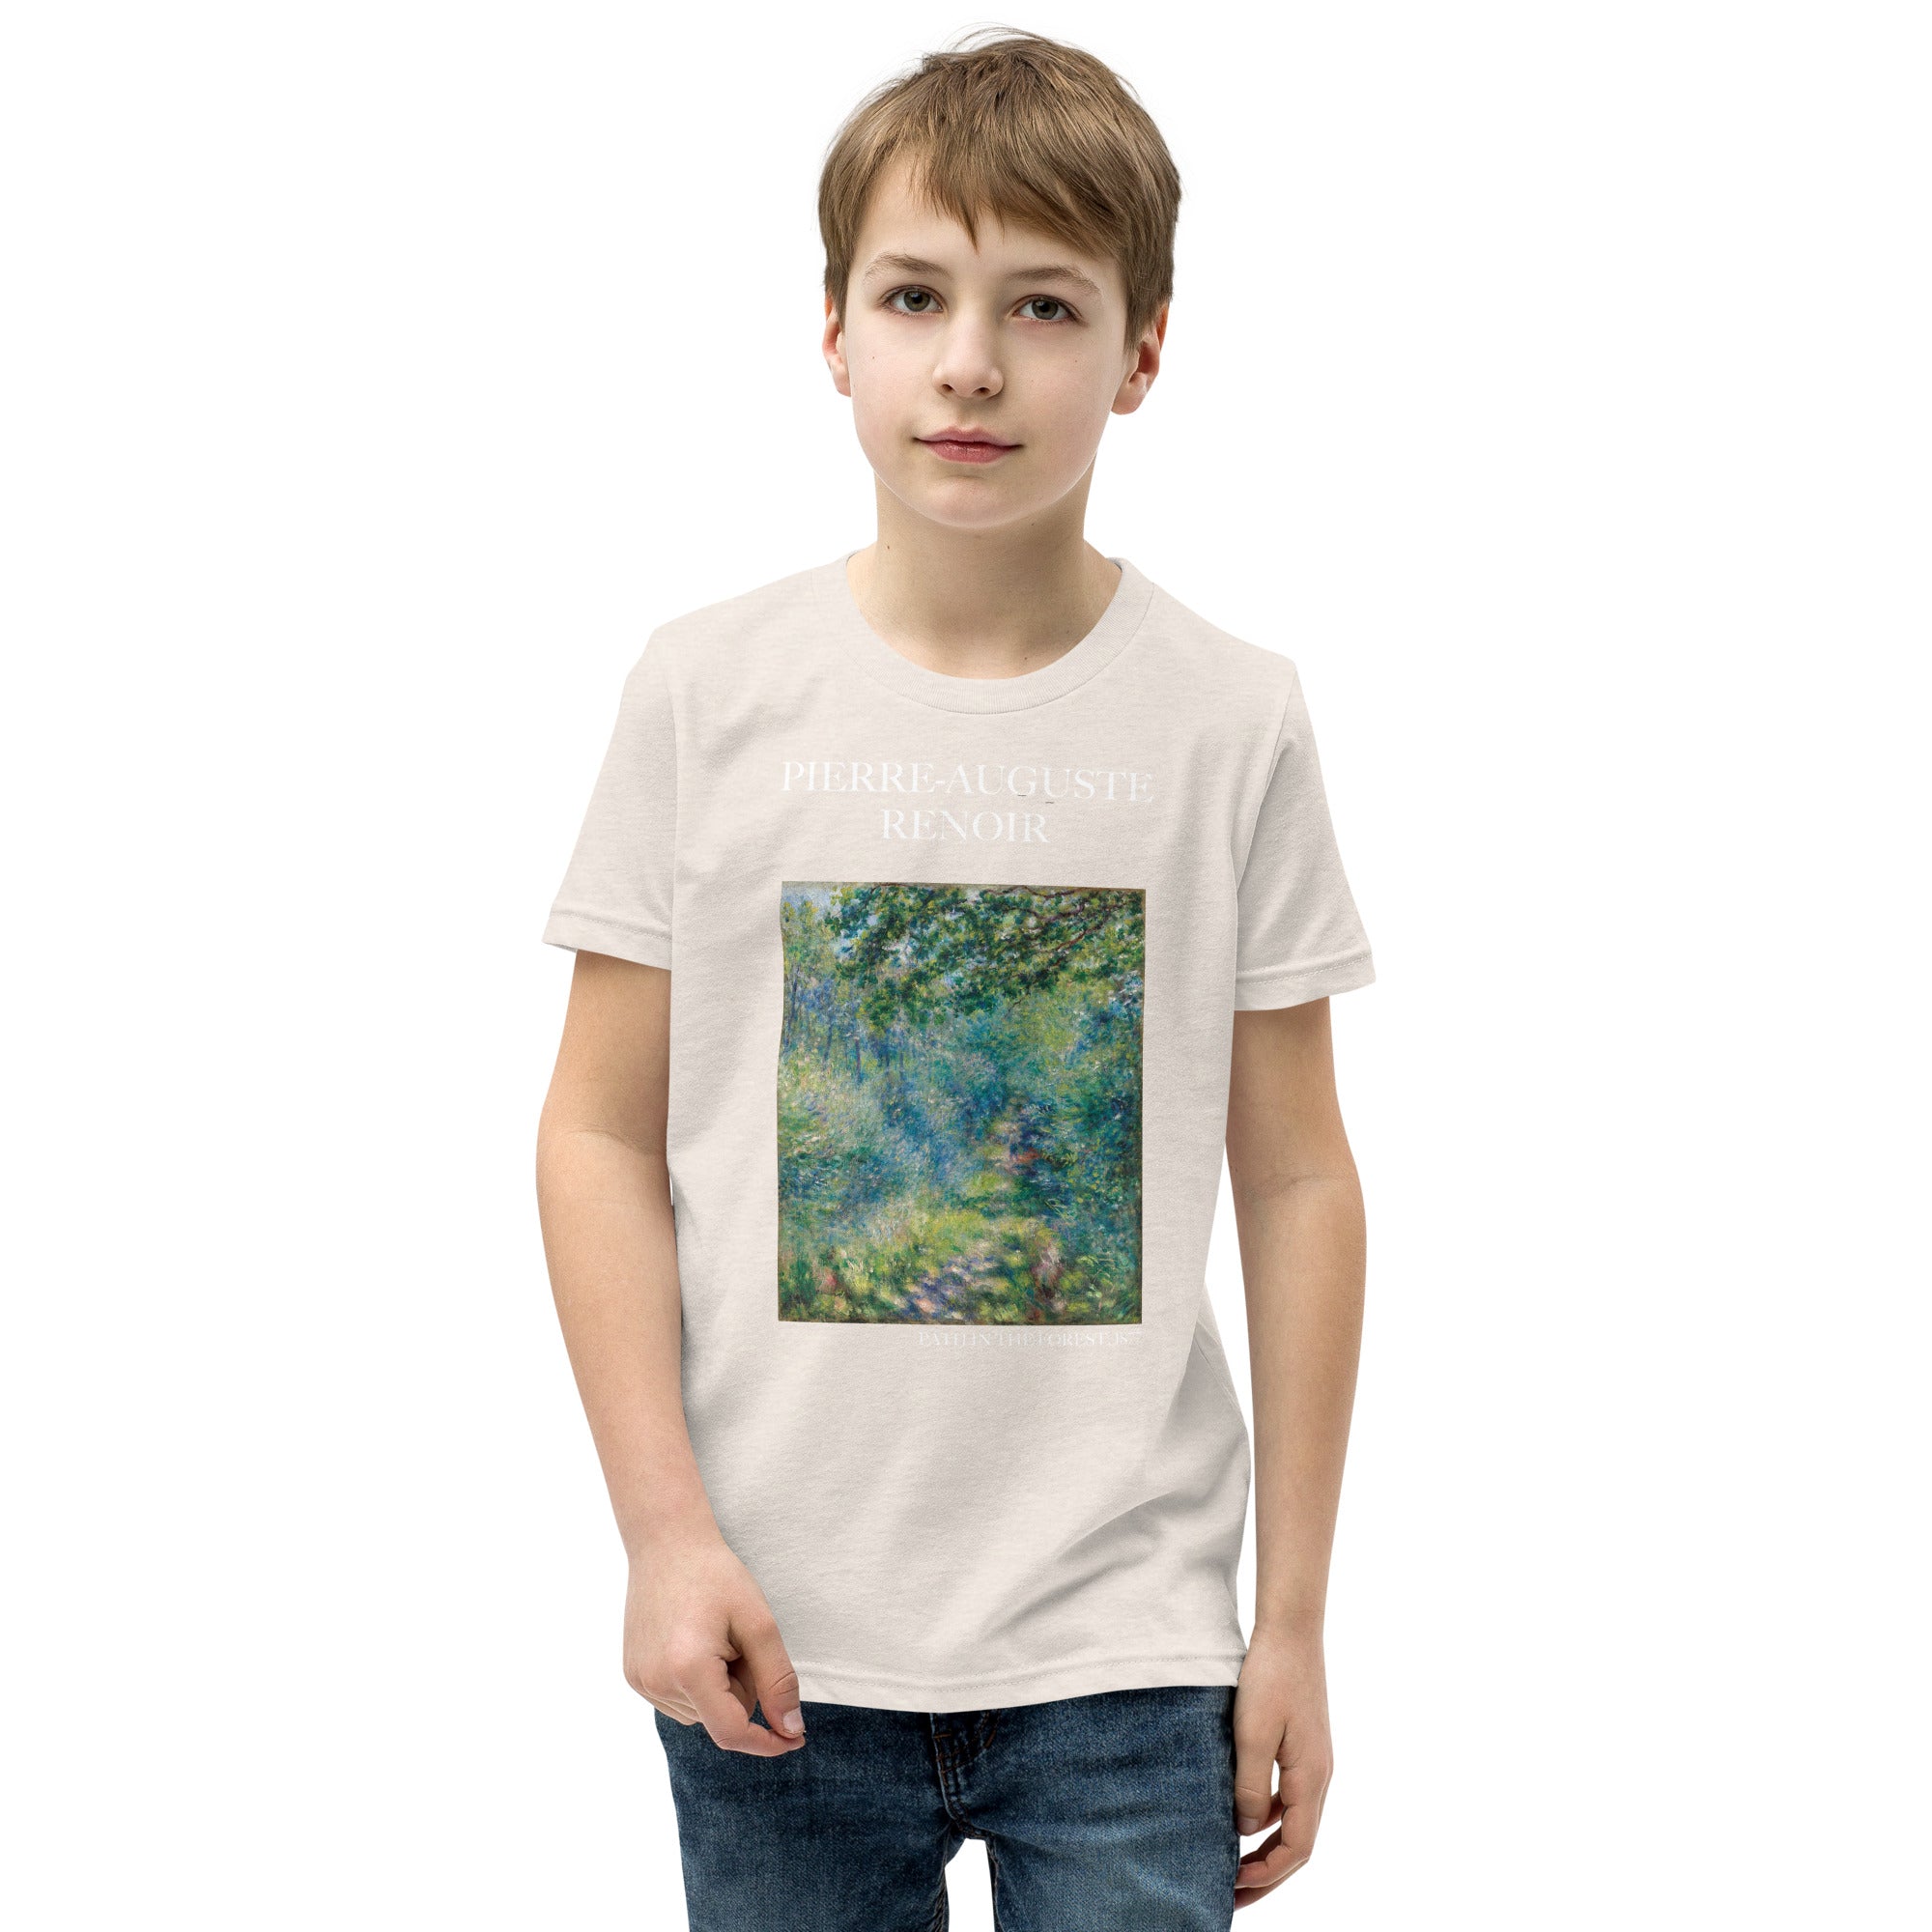 Pierre-Auguste Renoir 'Path in the Forest' Famous Painting Short Sleeve T-Shirt | Premium Youth Art Tee